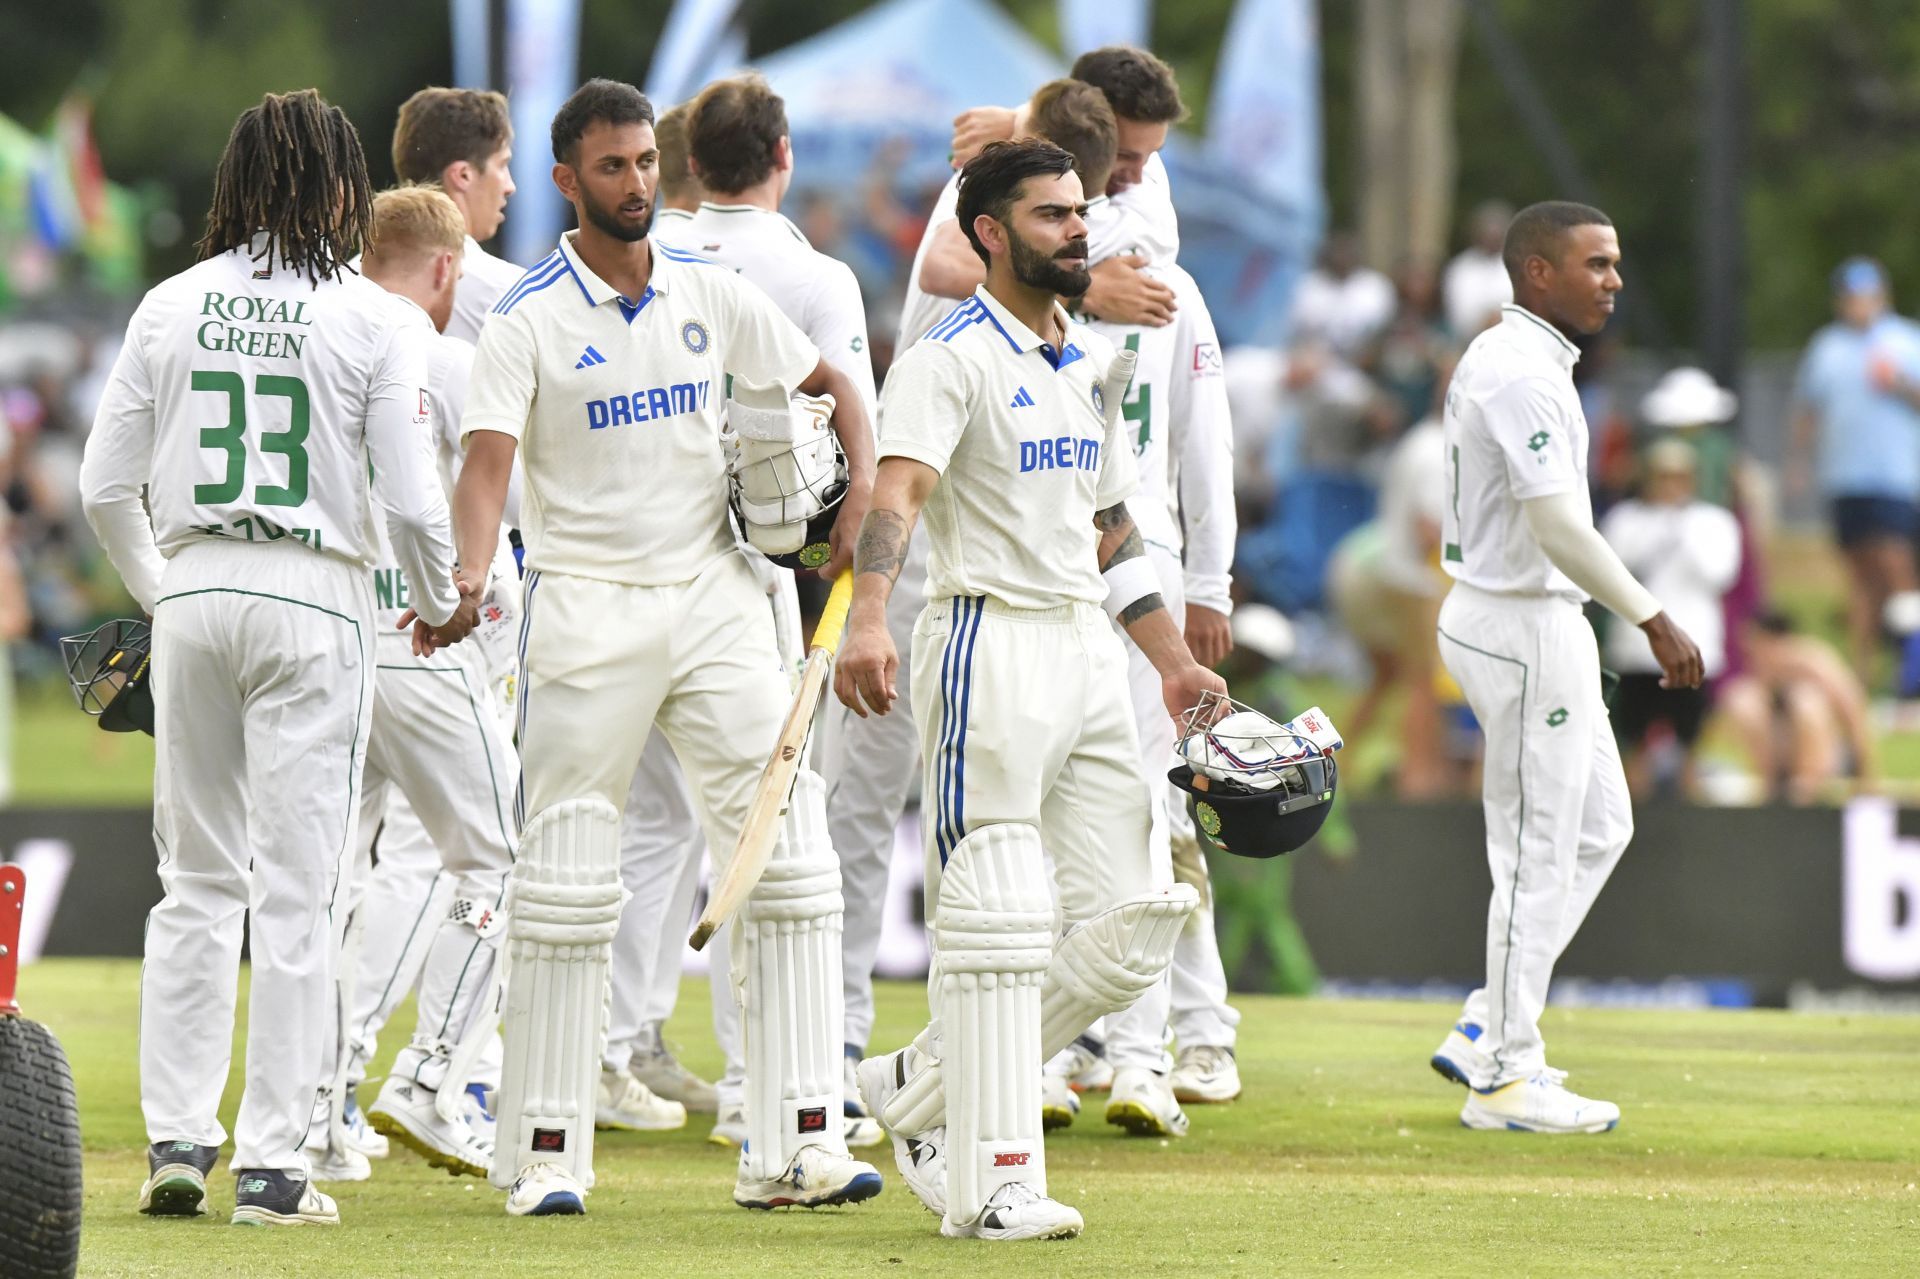 South Africa thrashed India by an innings and 32 runs in the first Test. [P/C: Getty]